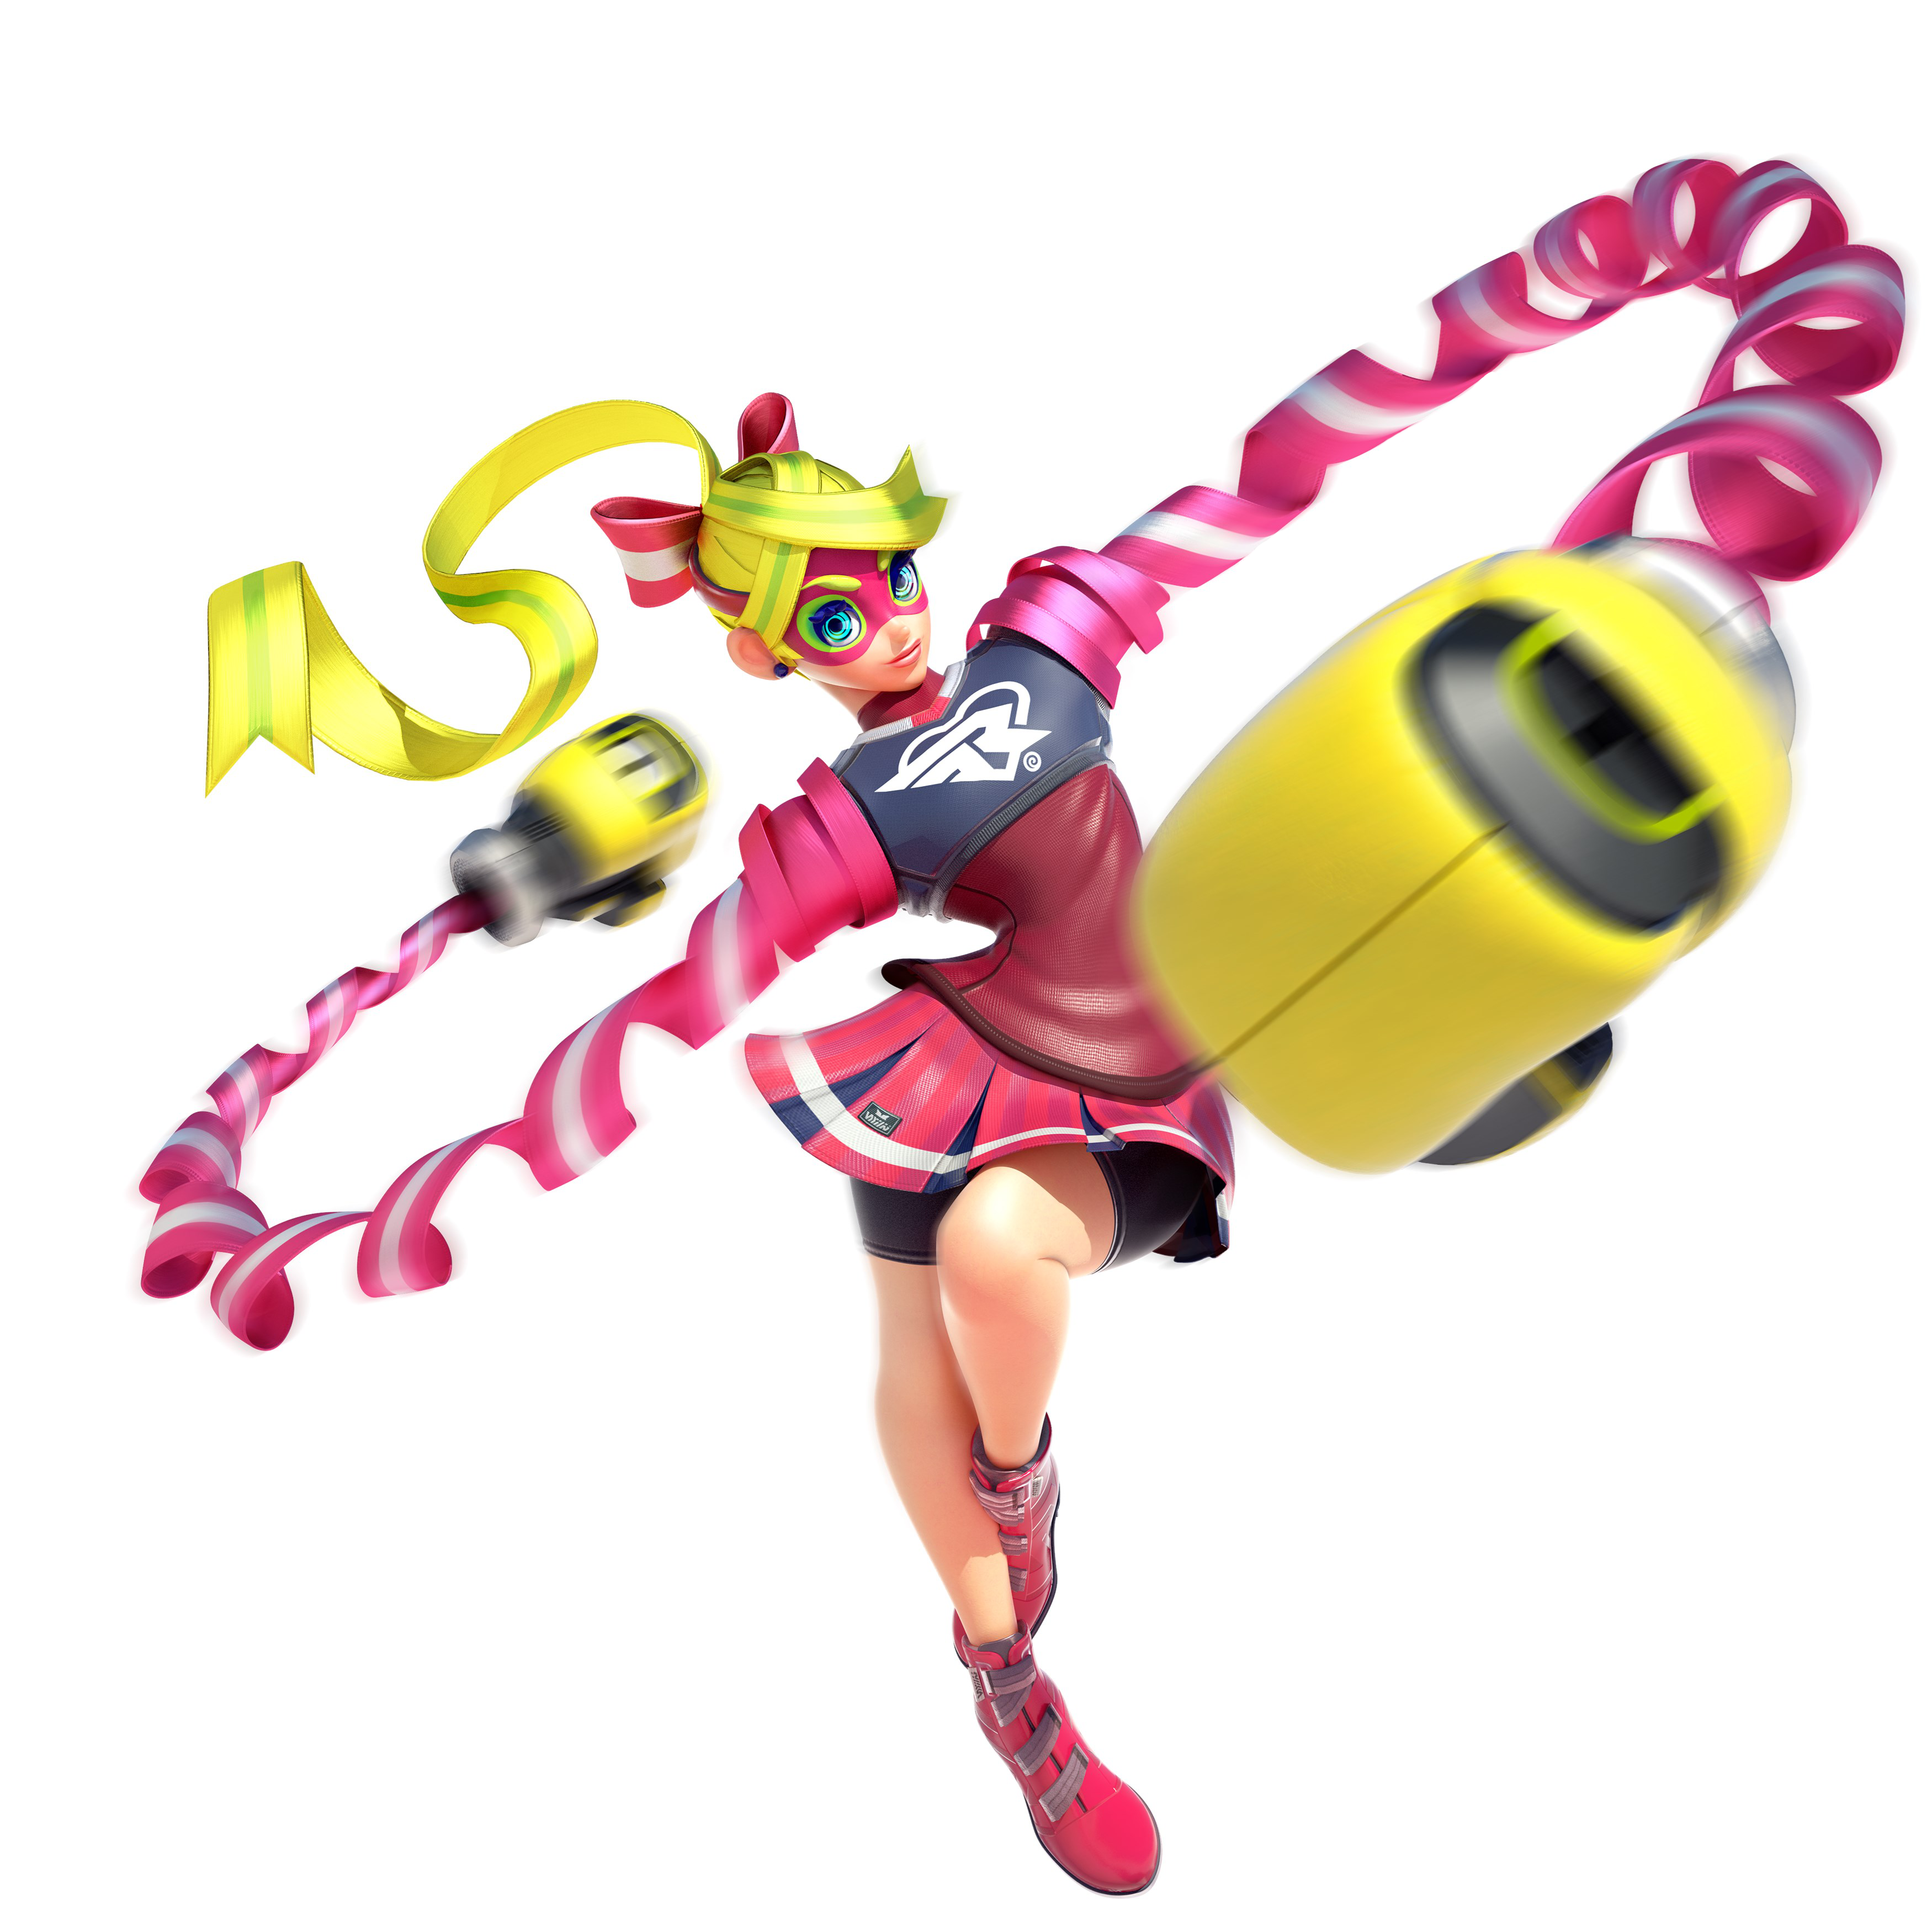 eShop Listing Says All Ten ARMS Characters Will Be Playable In Demo - My  Nintendo News